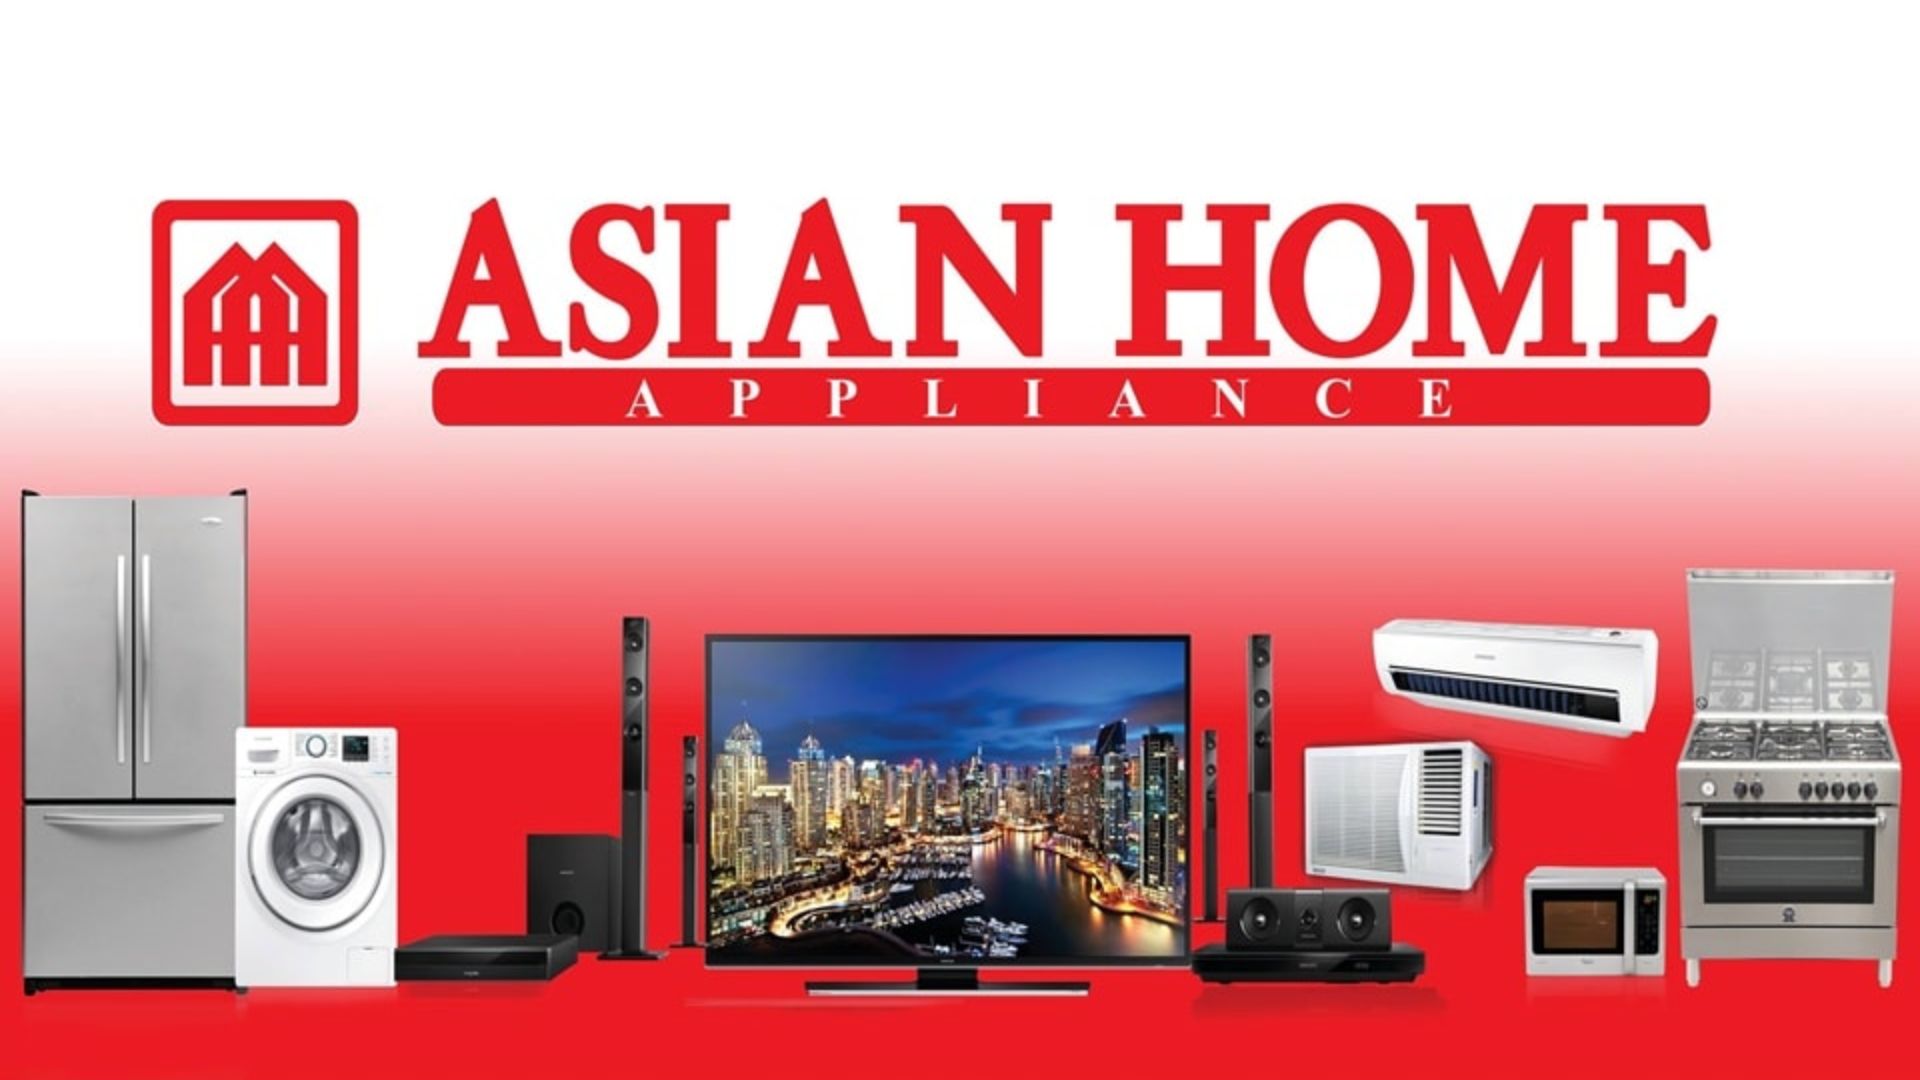 Asian Home Appliance